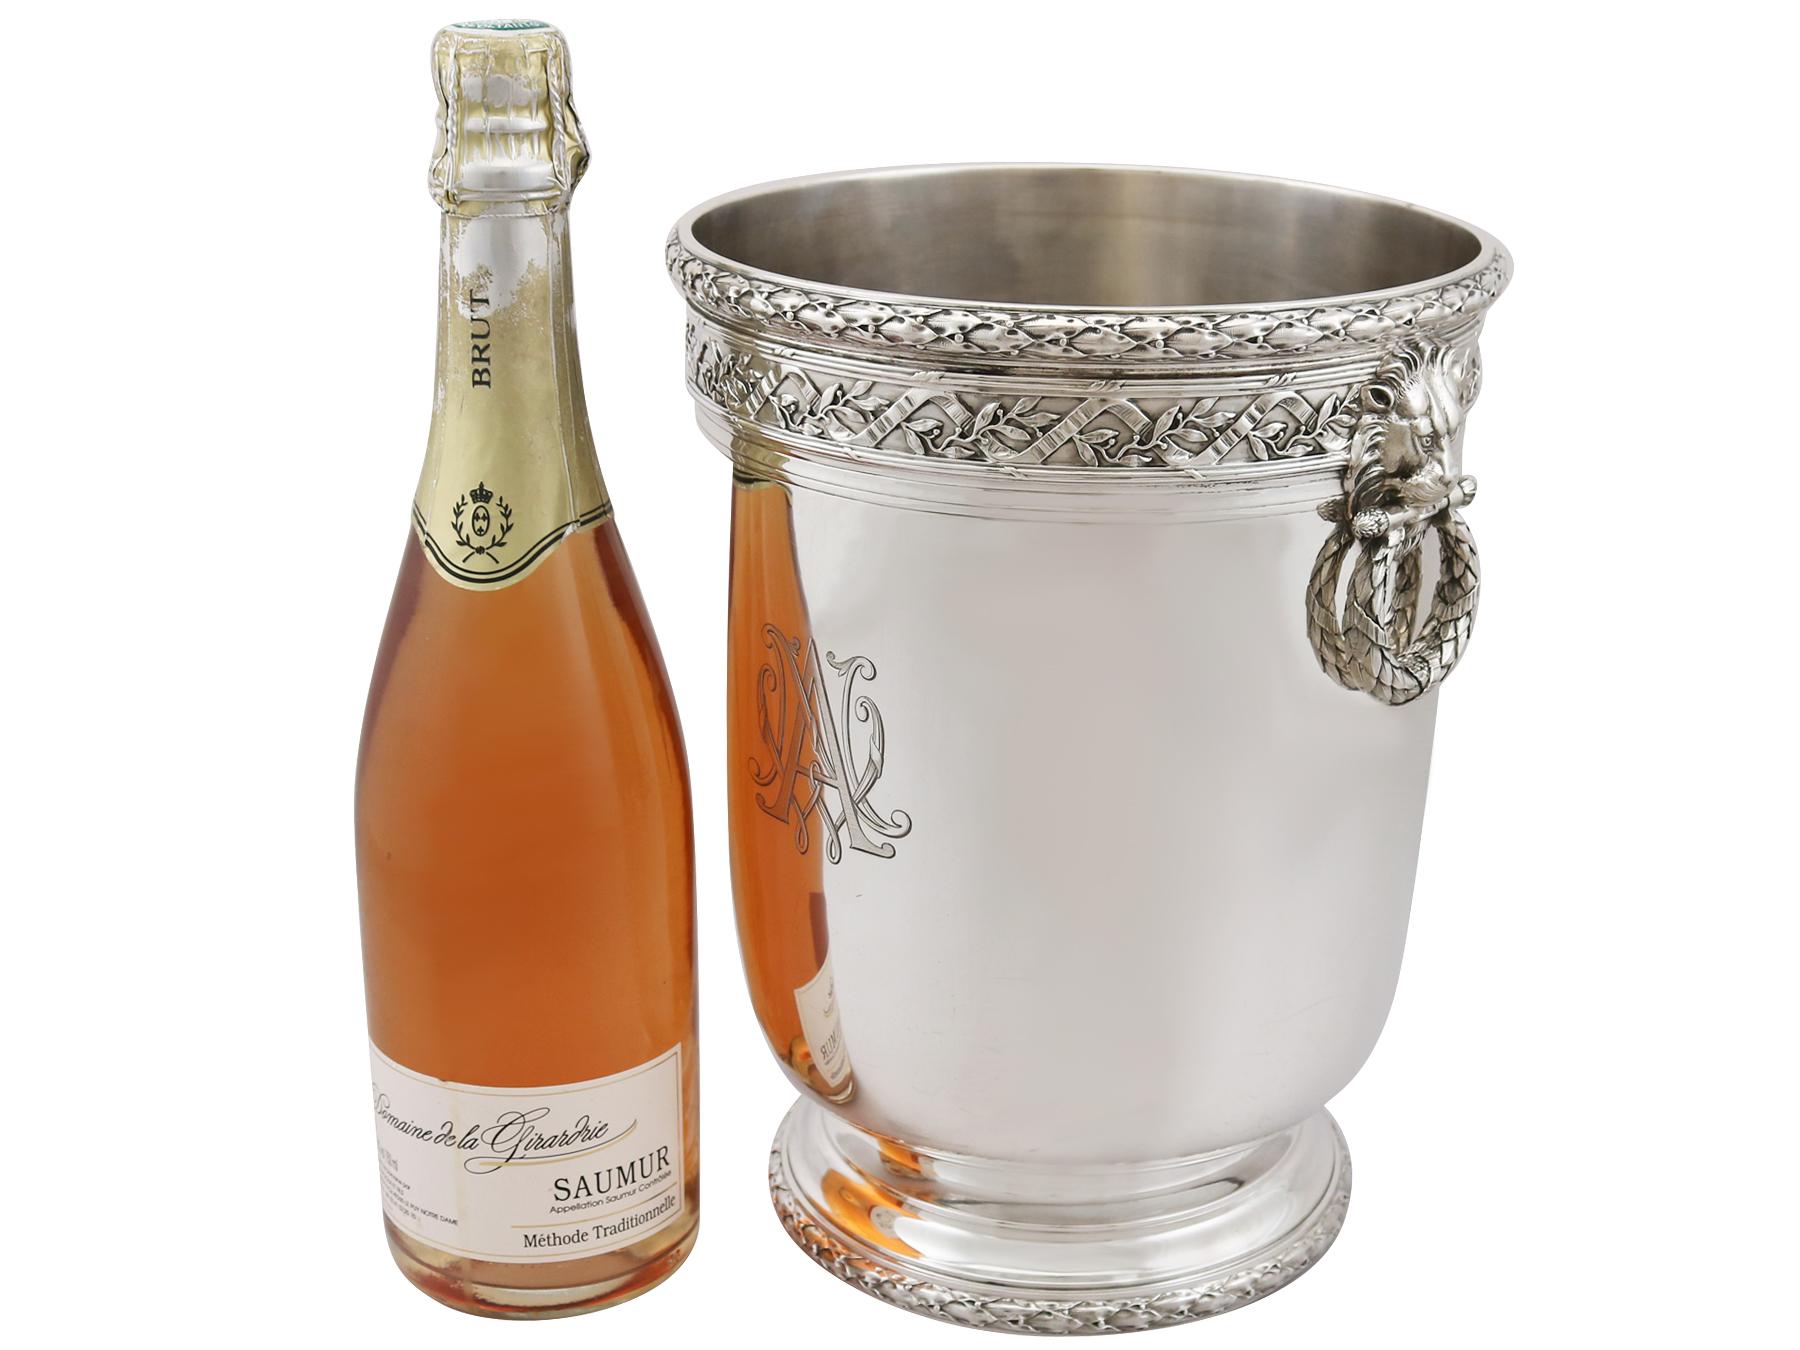 An exceptional, fine and impressive antique French silver wine or champagne cooler; an addition to our presentation silverware collection.

This exceptional antique French silver wine cooler has a cylindrical rounded form.

The surface of this